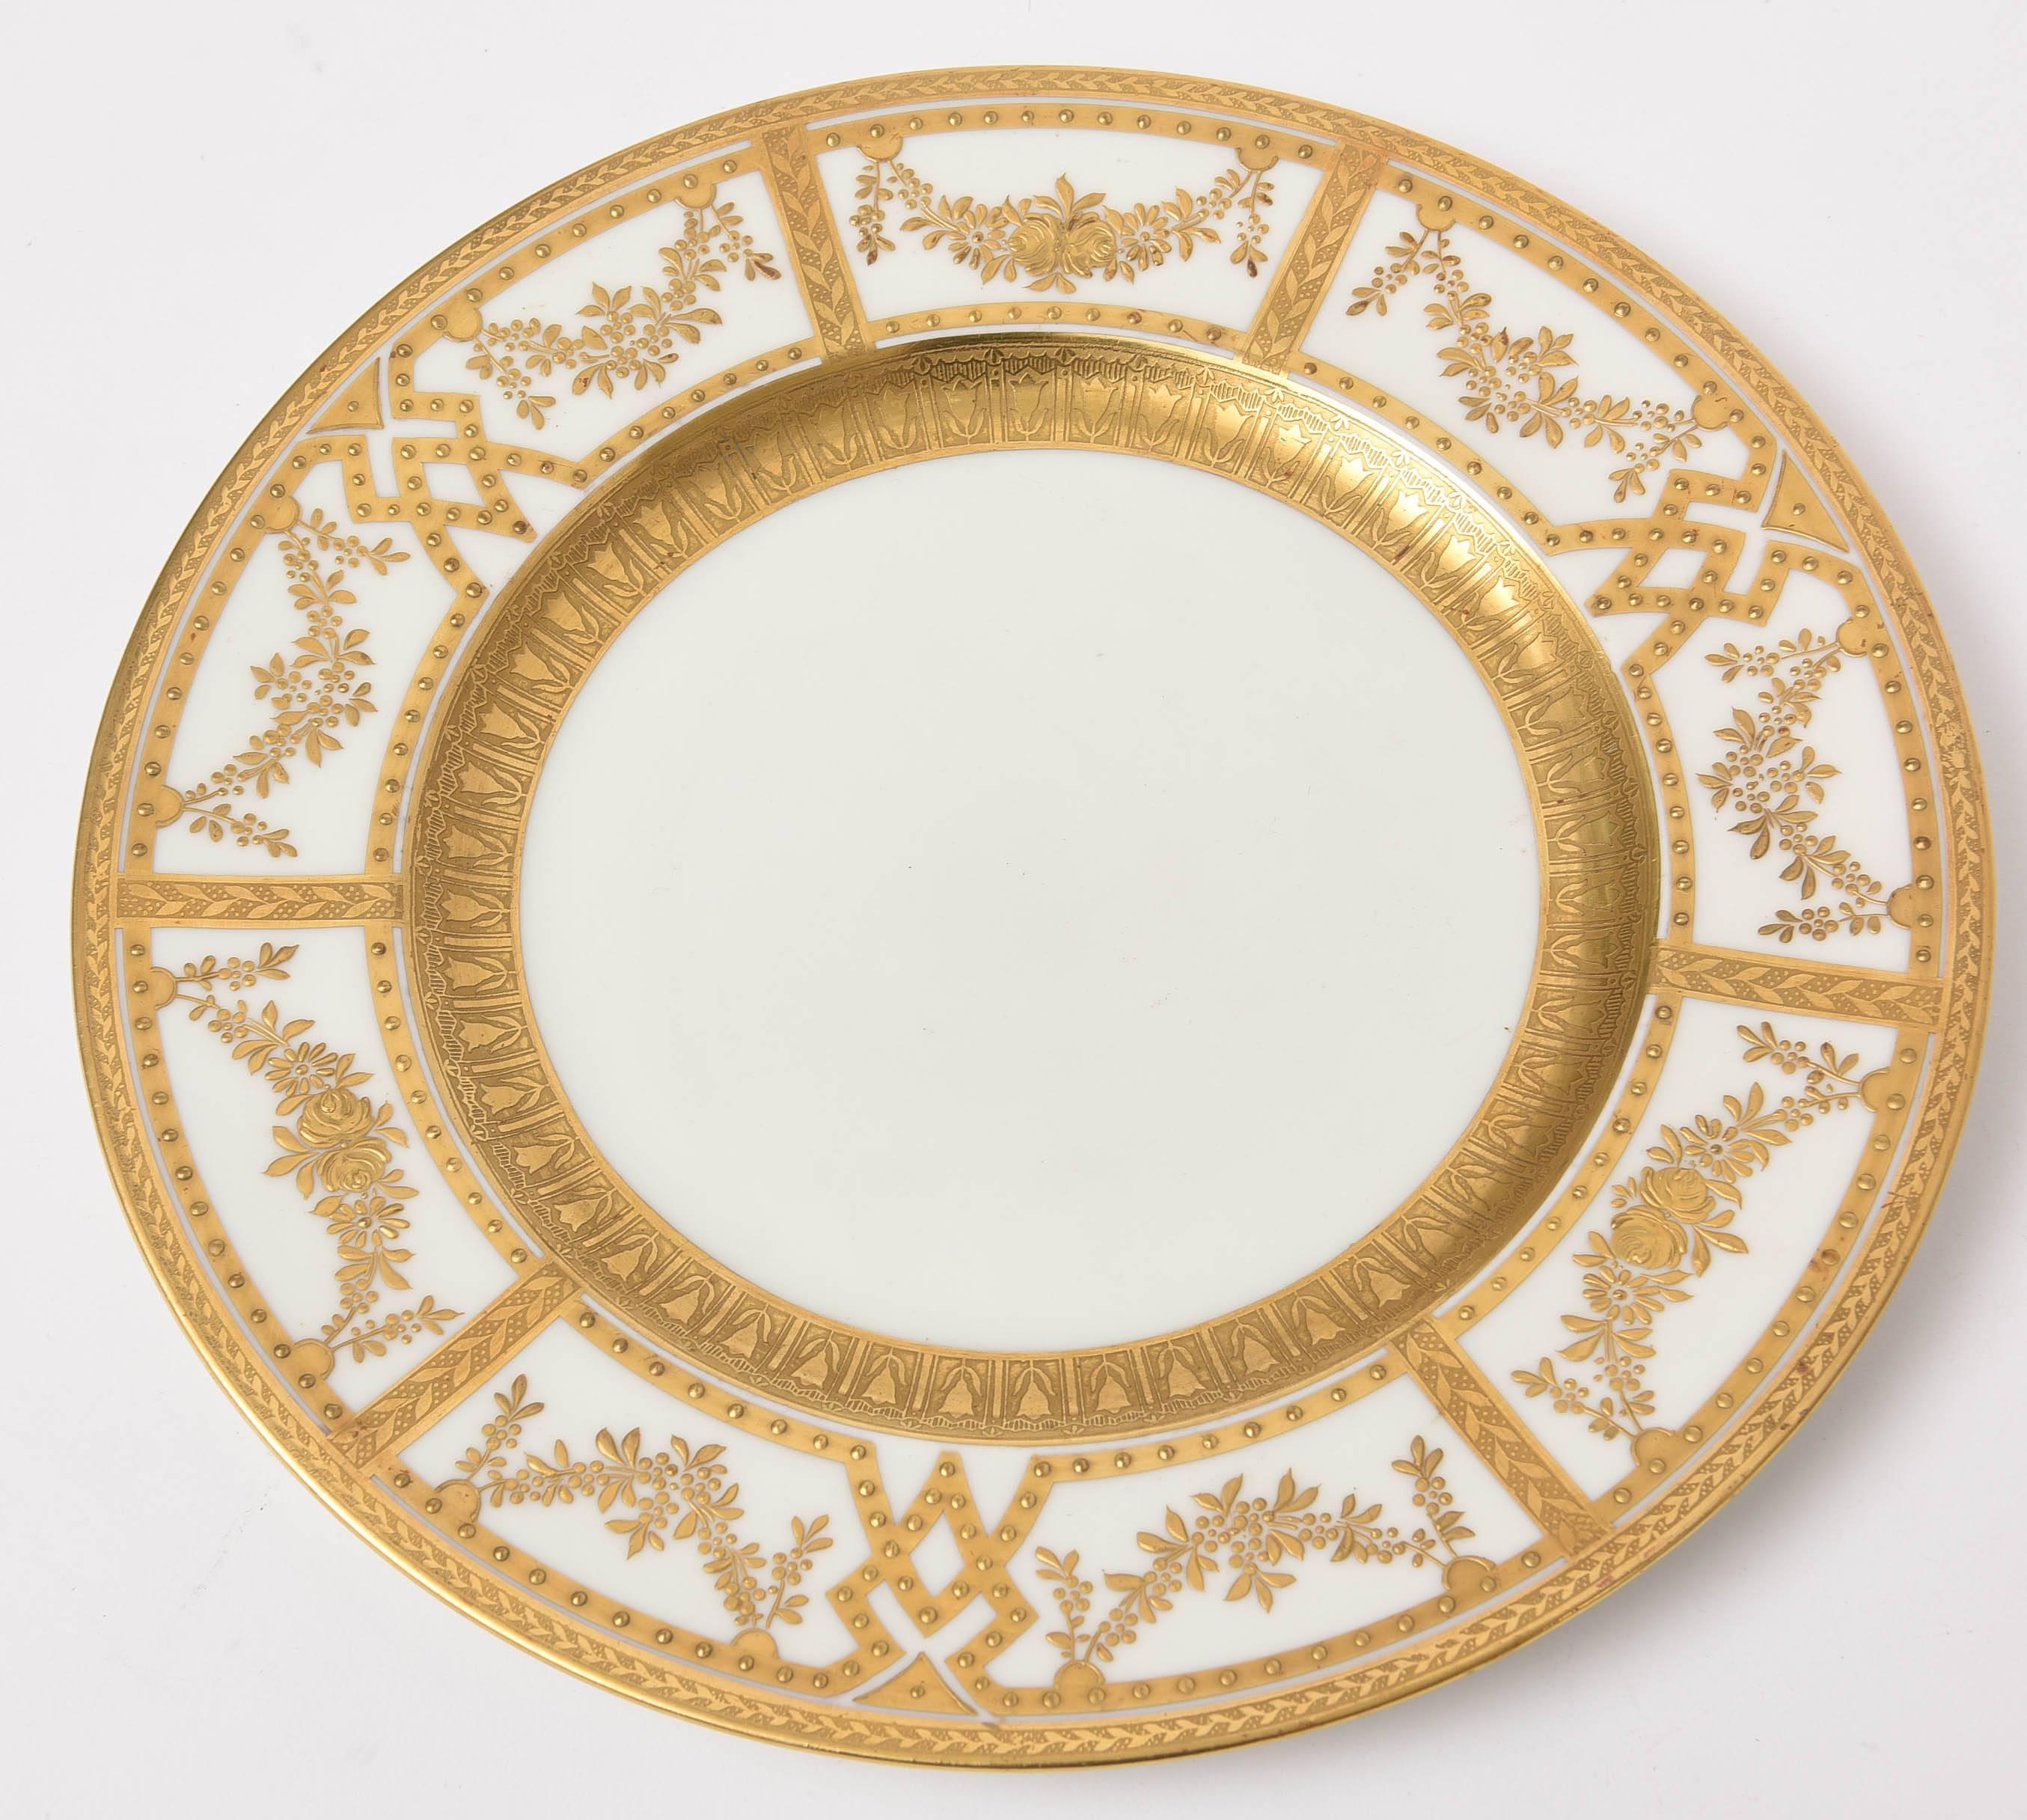 12 Antique English Dinner Plates with Raised Tooled Gold, Hand Decorated 3